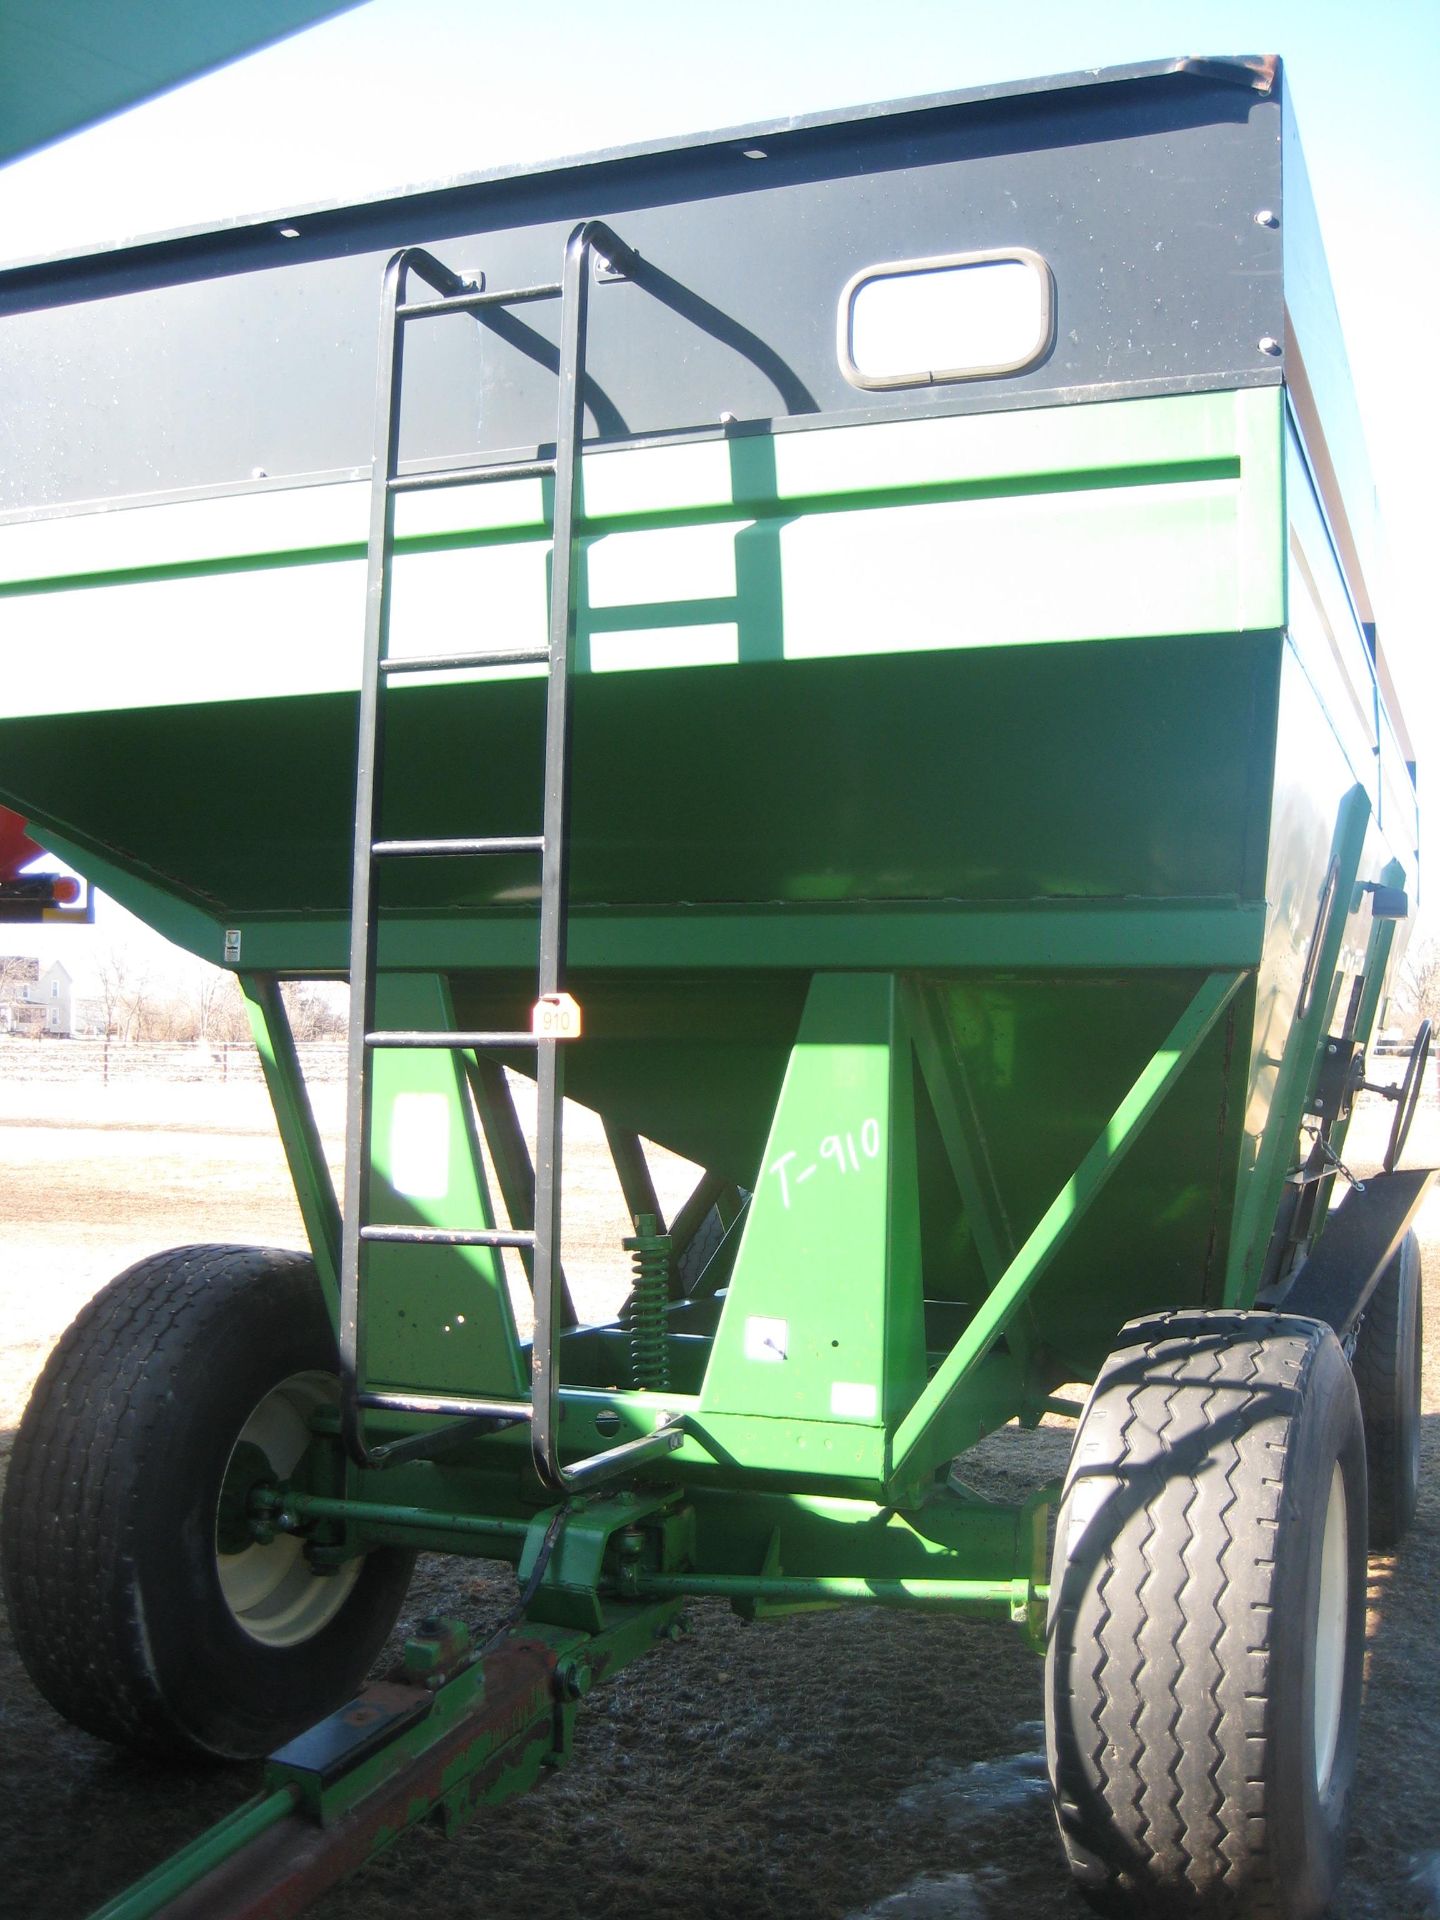 Brent 540 Gravity Wagon, 425-65R/22.5 tires, green - Image 7 of 15